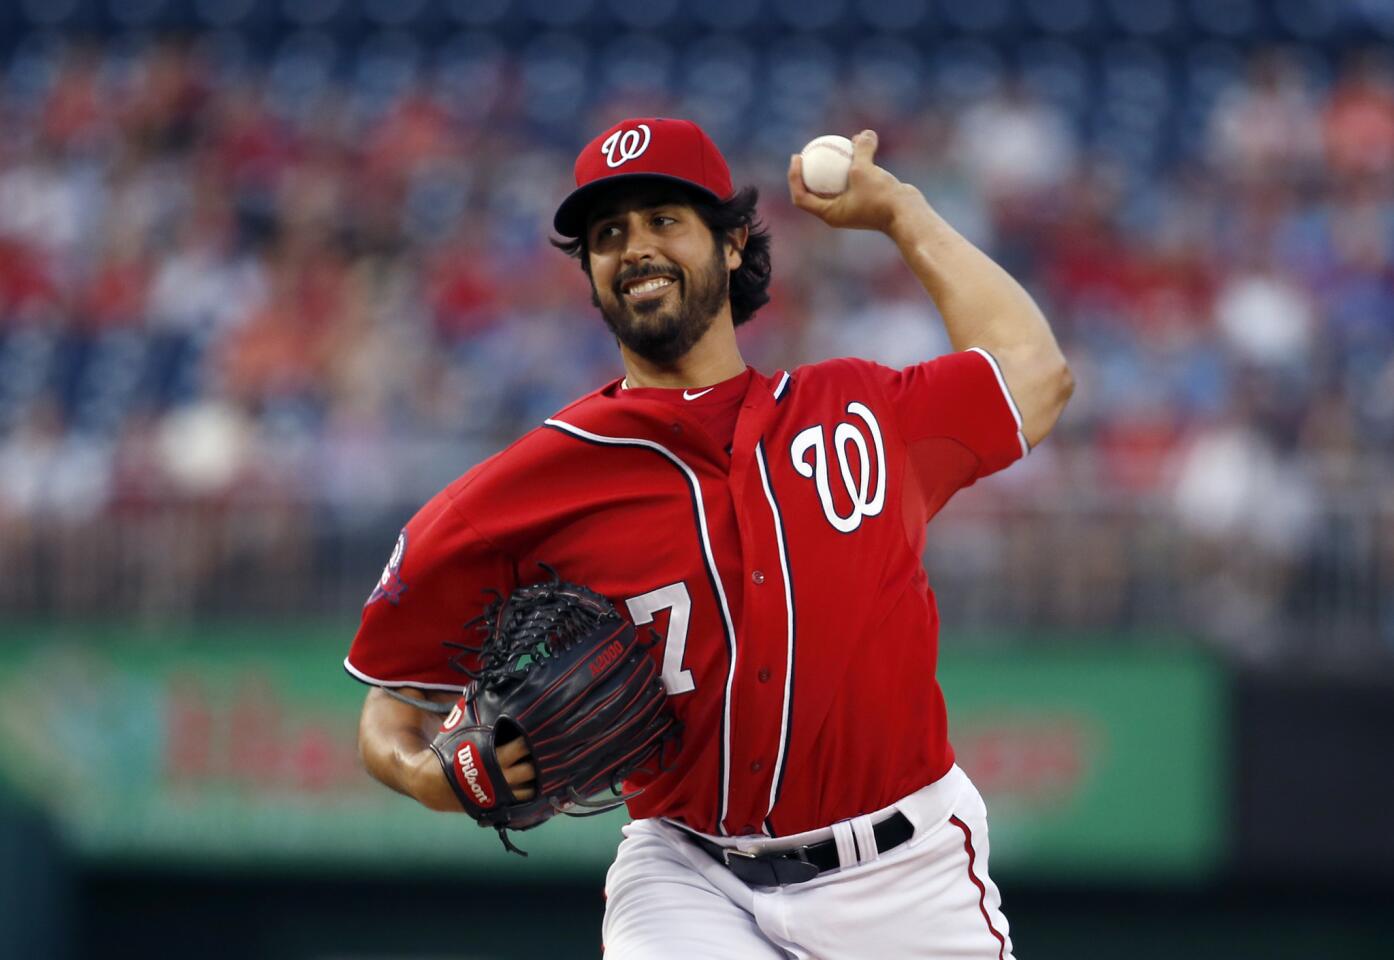 LHP Gio Gonzalez, Nationals, Miami Monsignor Pace